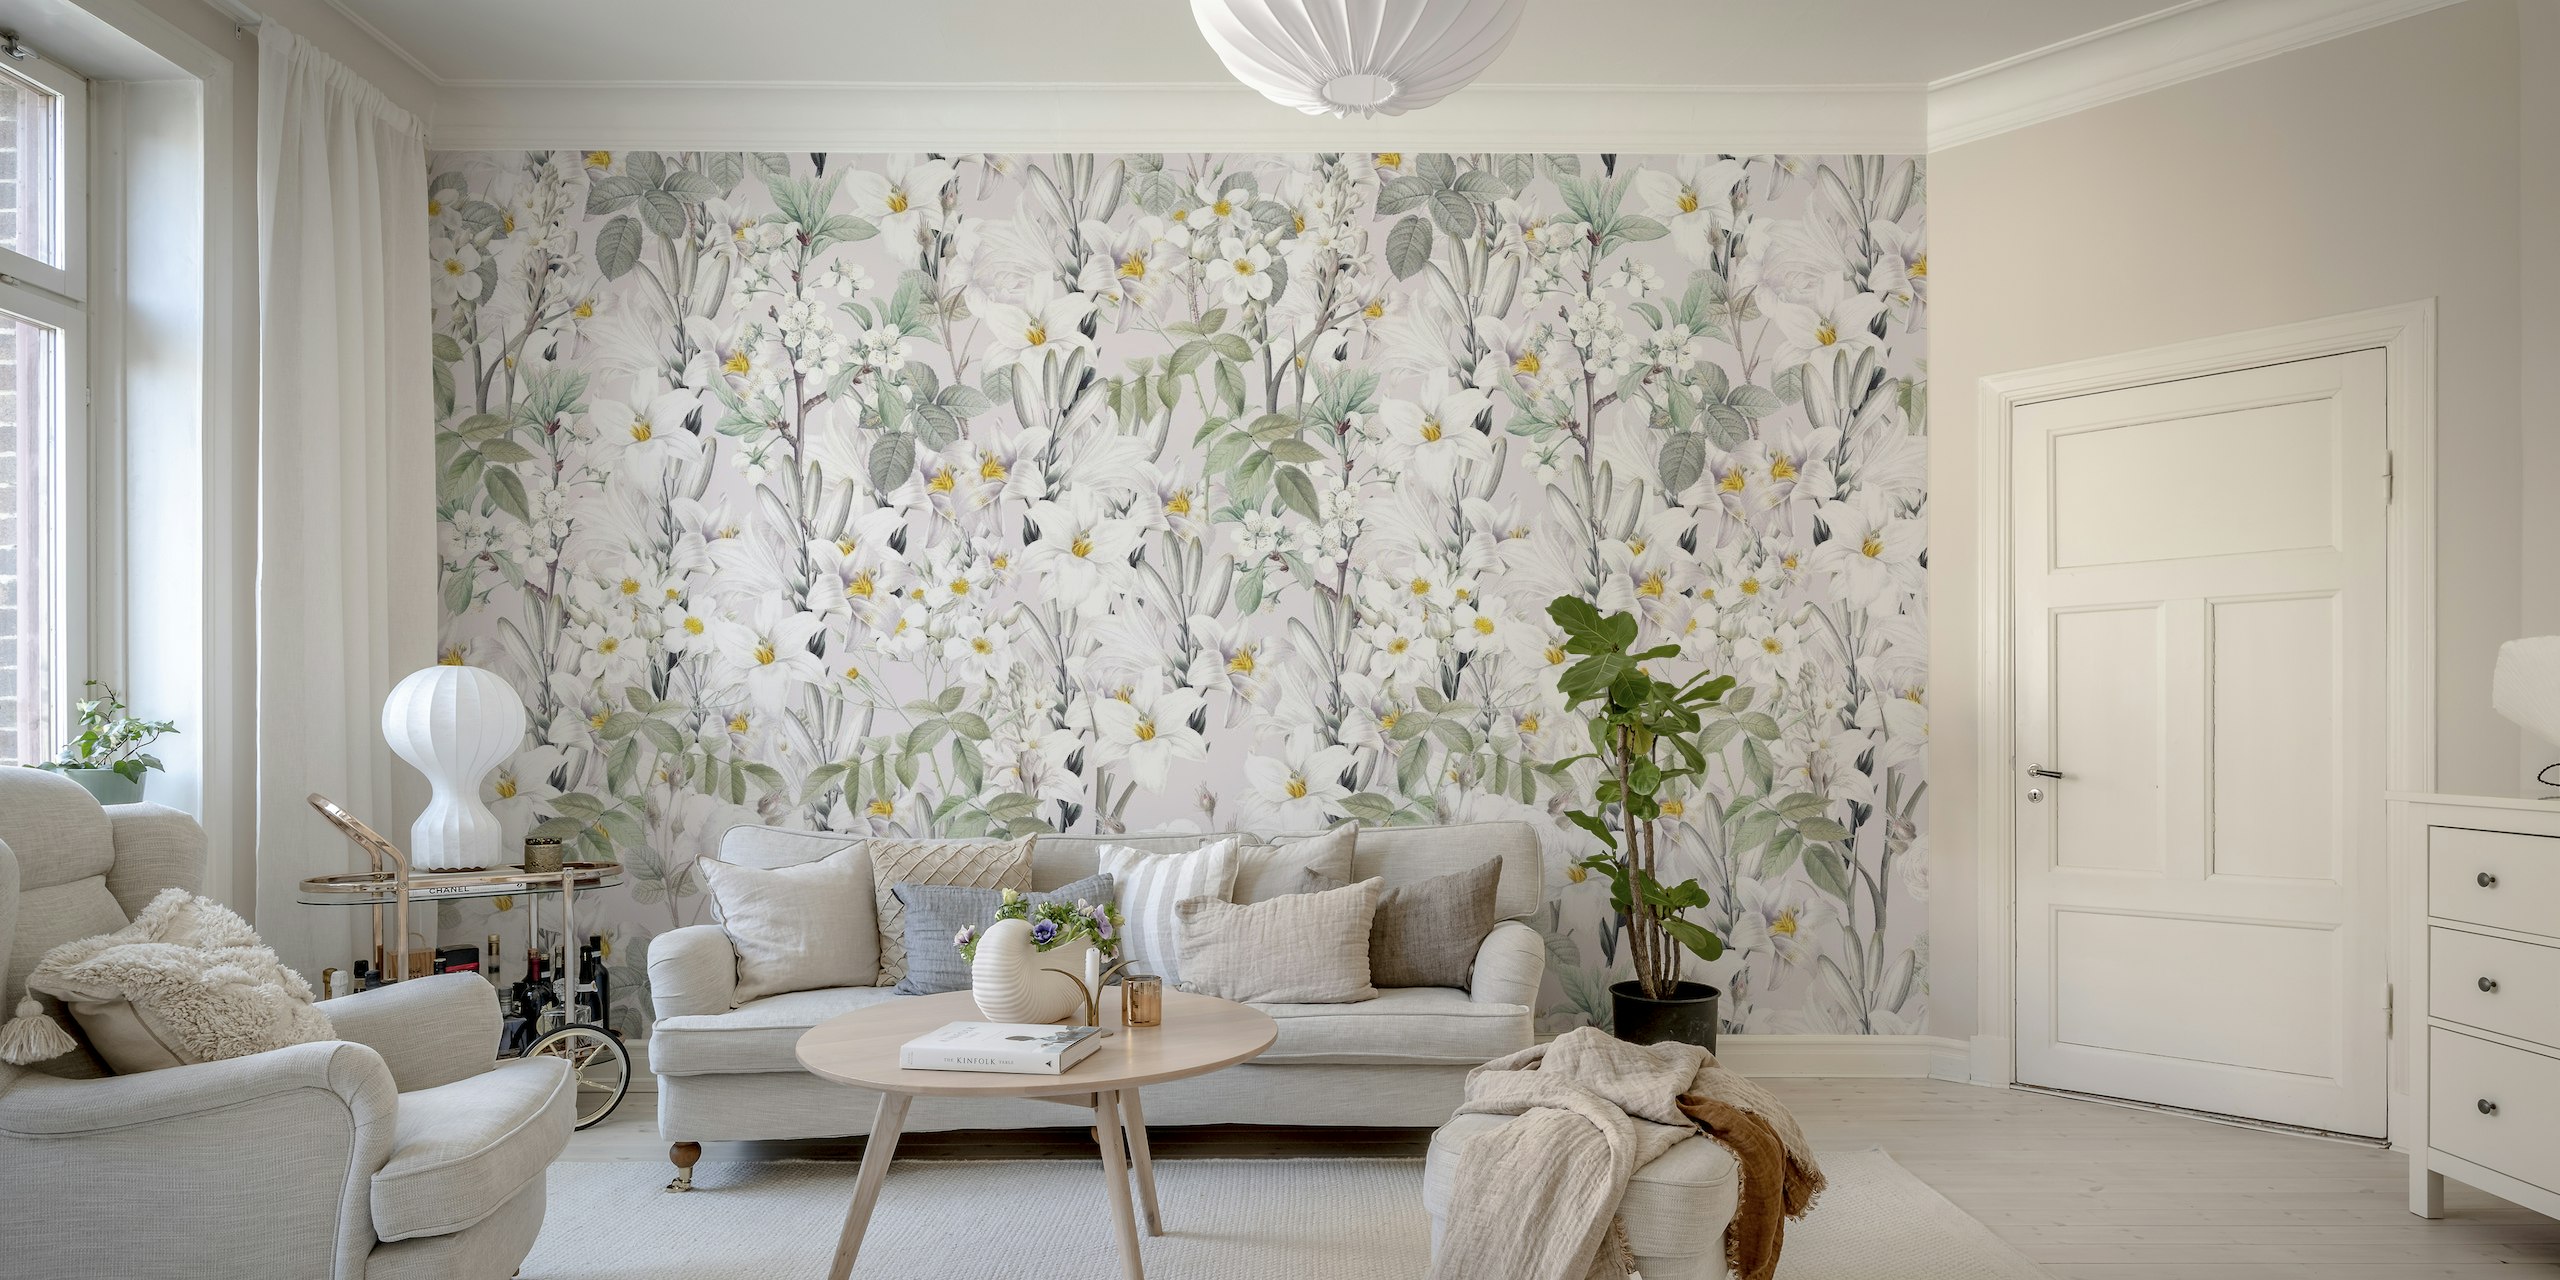 Magic Garden wall mural with white flowers and green foliage